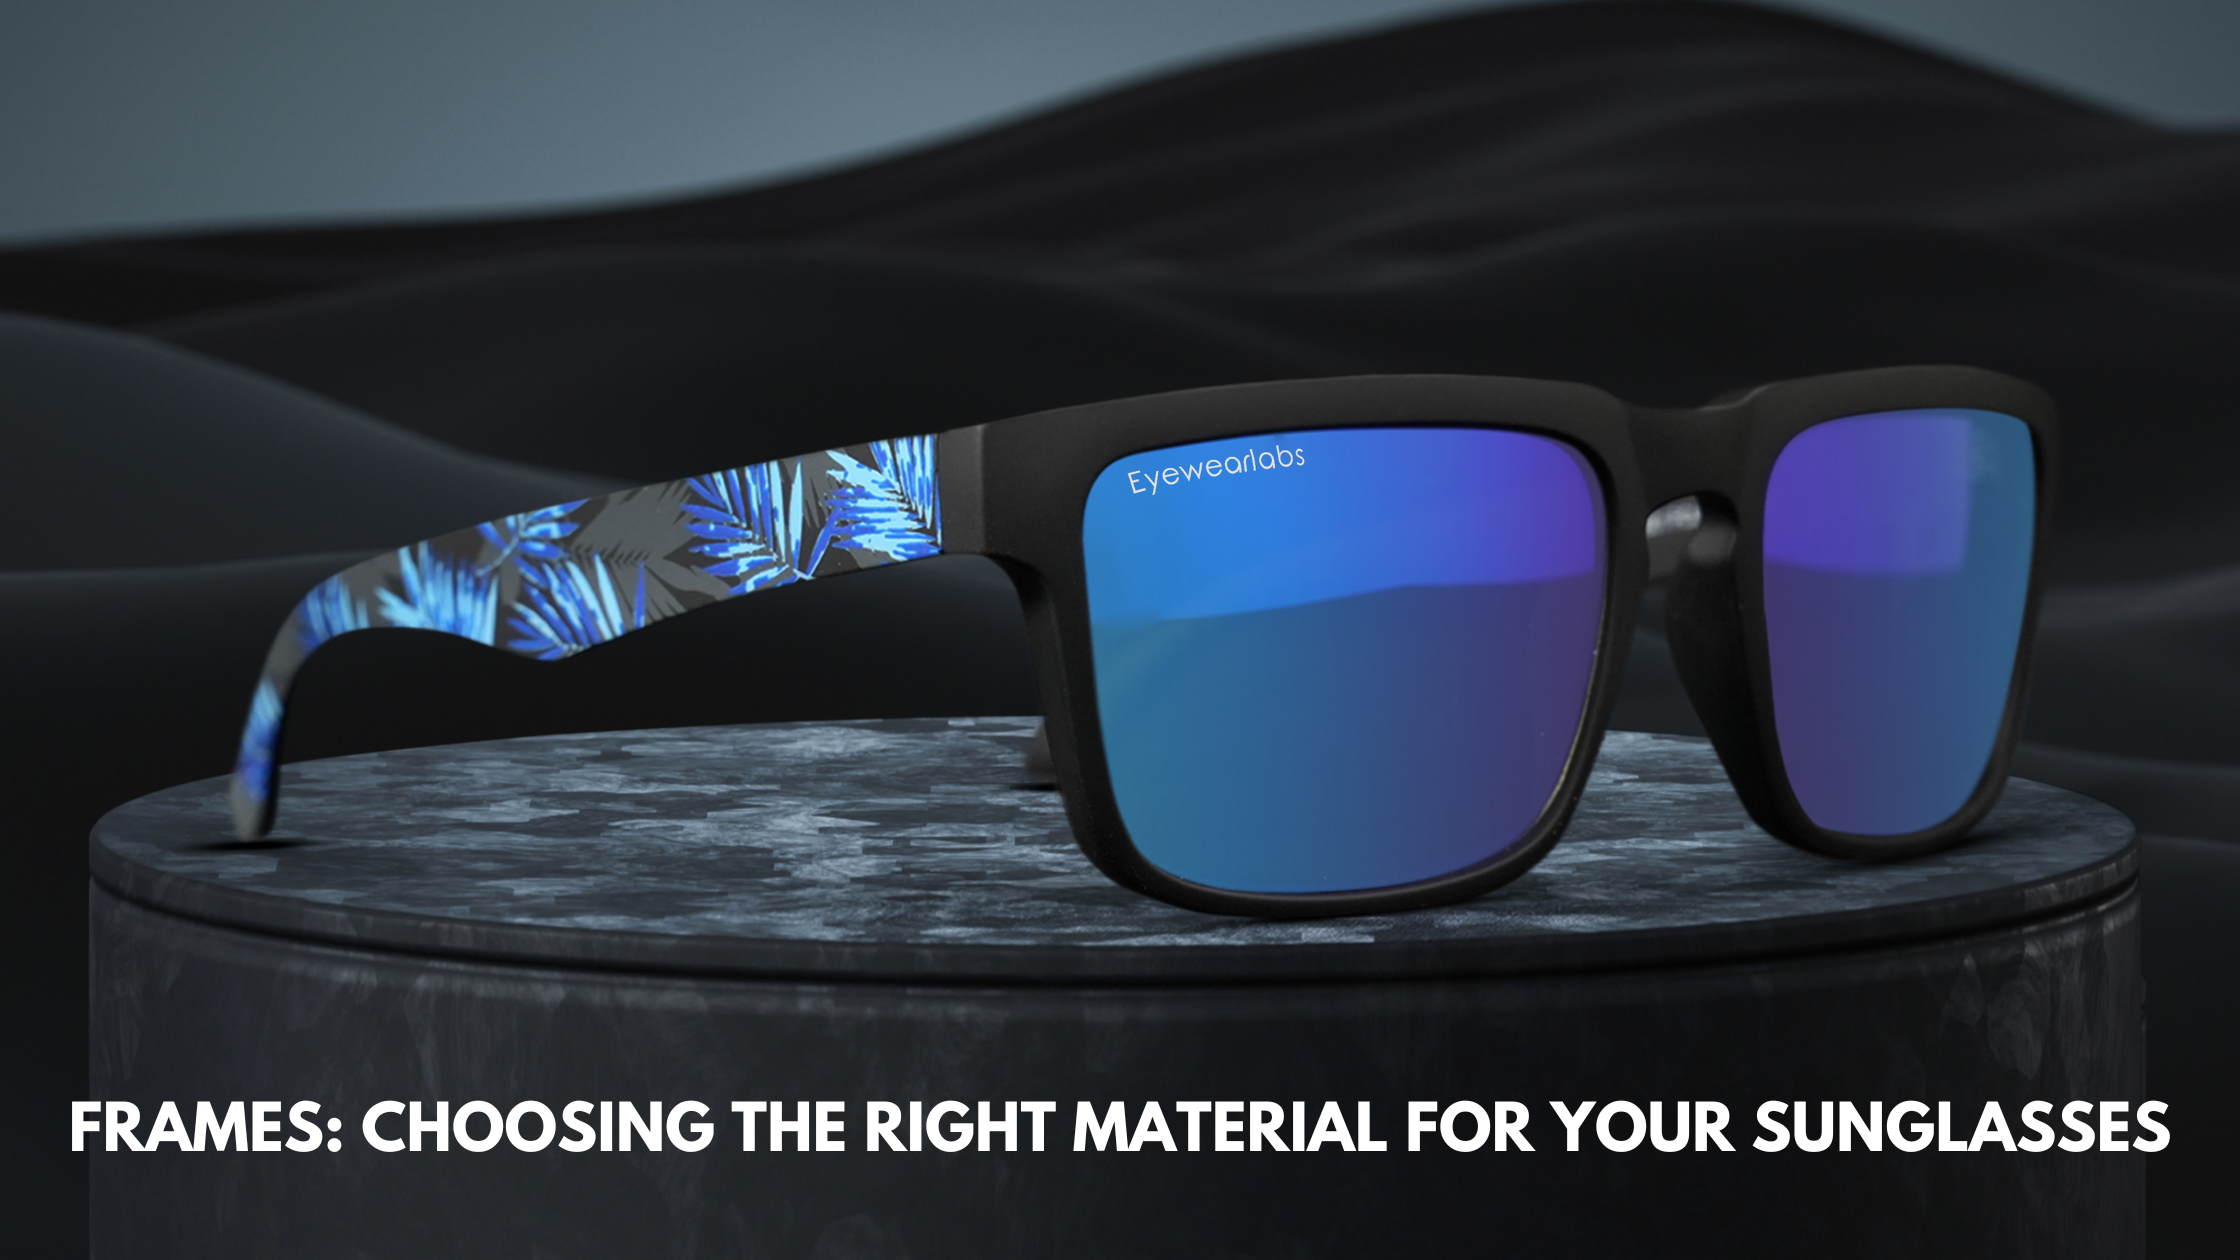 Frames: Choosing the Right Material for Your Sunglasses